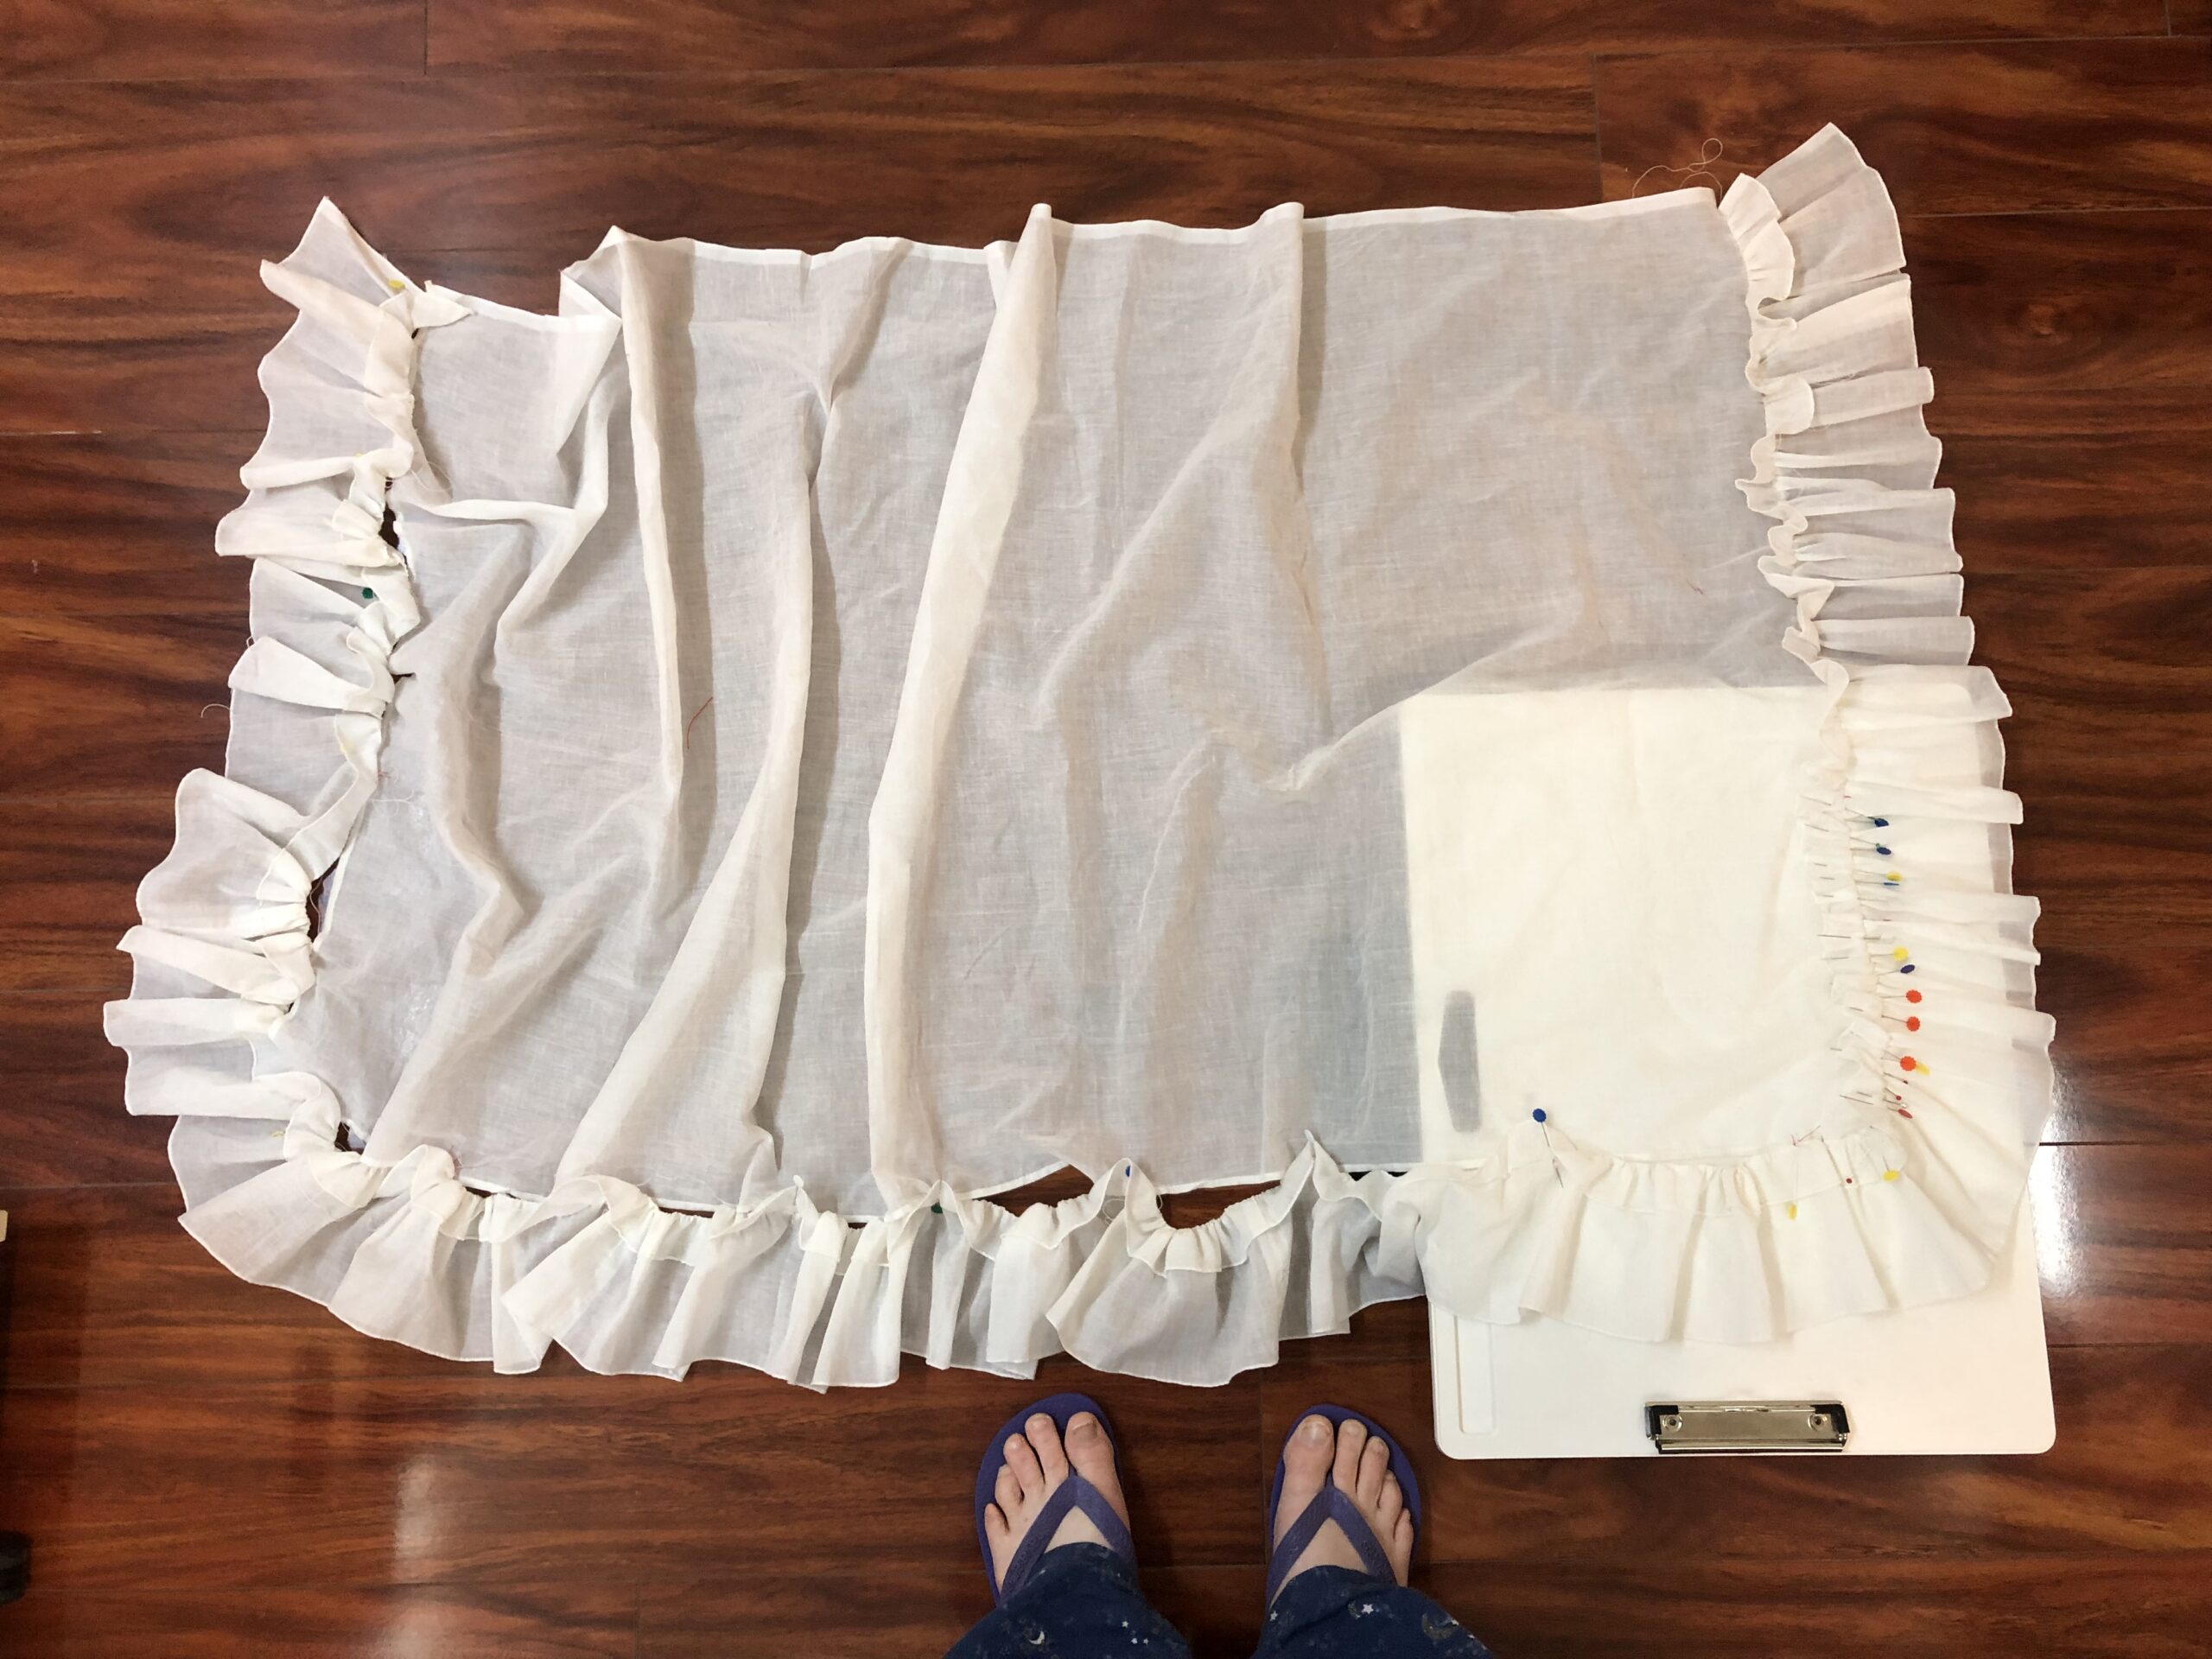 An apron laid out on the floor. The ruffle has been gathered and partially pinned to the edges of the apron.